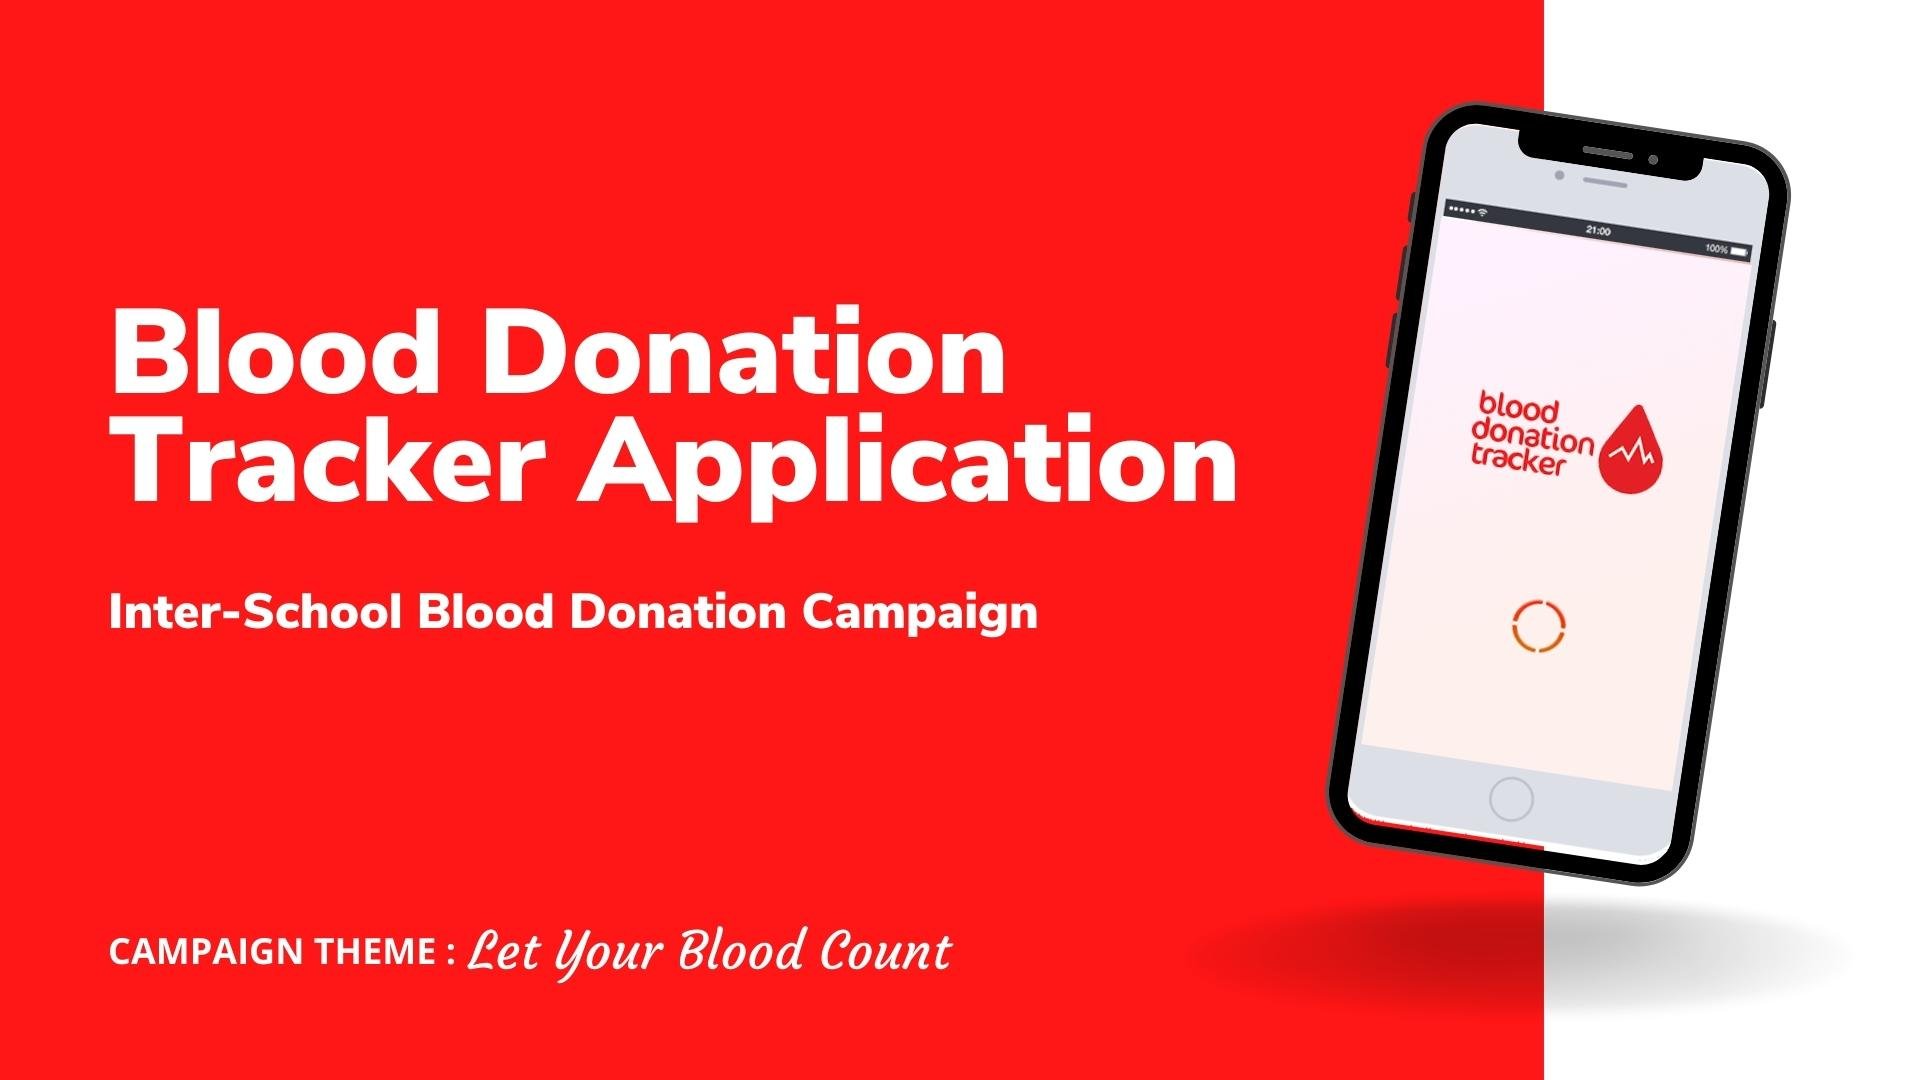 Roll out of the Blood Donation Tracker App and Refresher Training (January 2022)